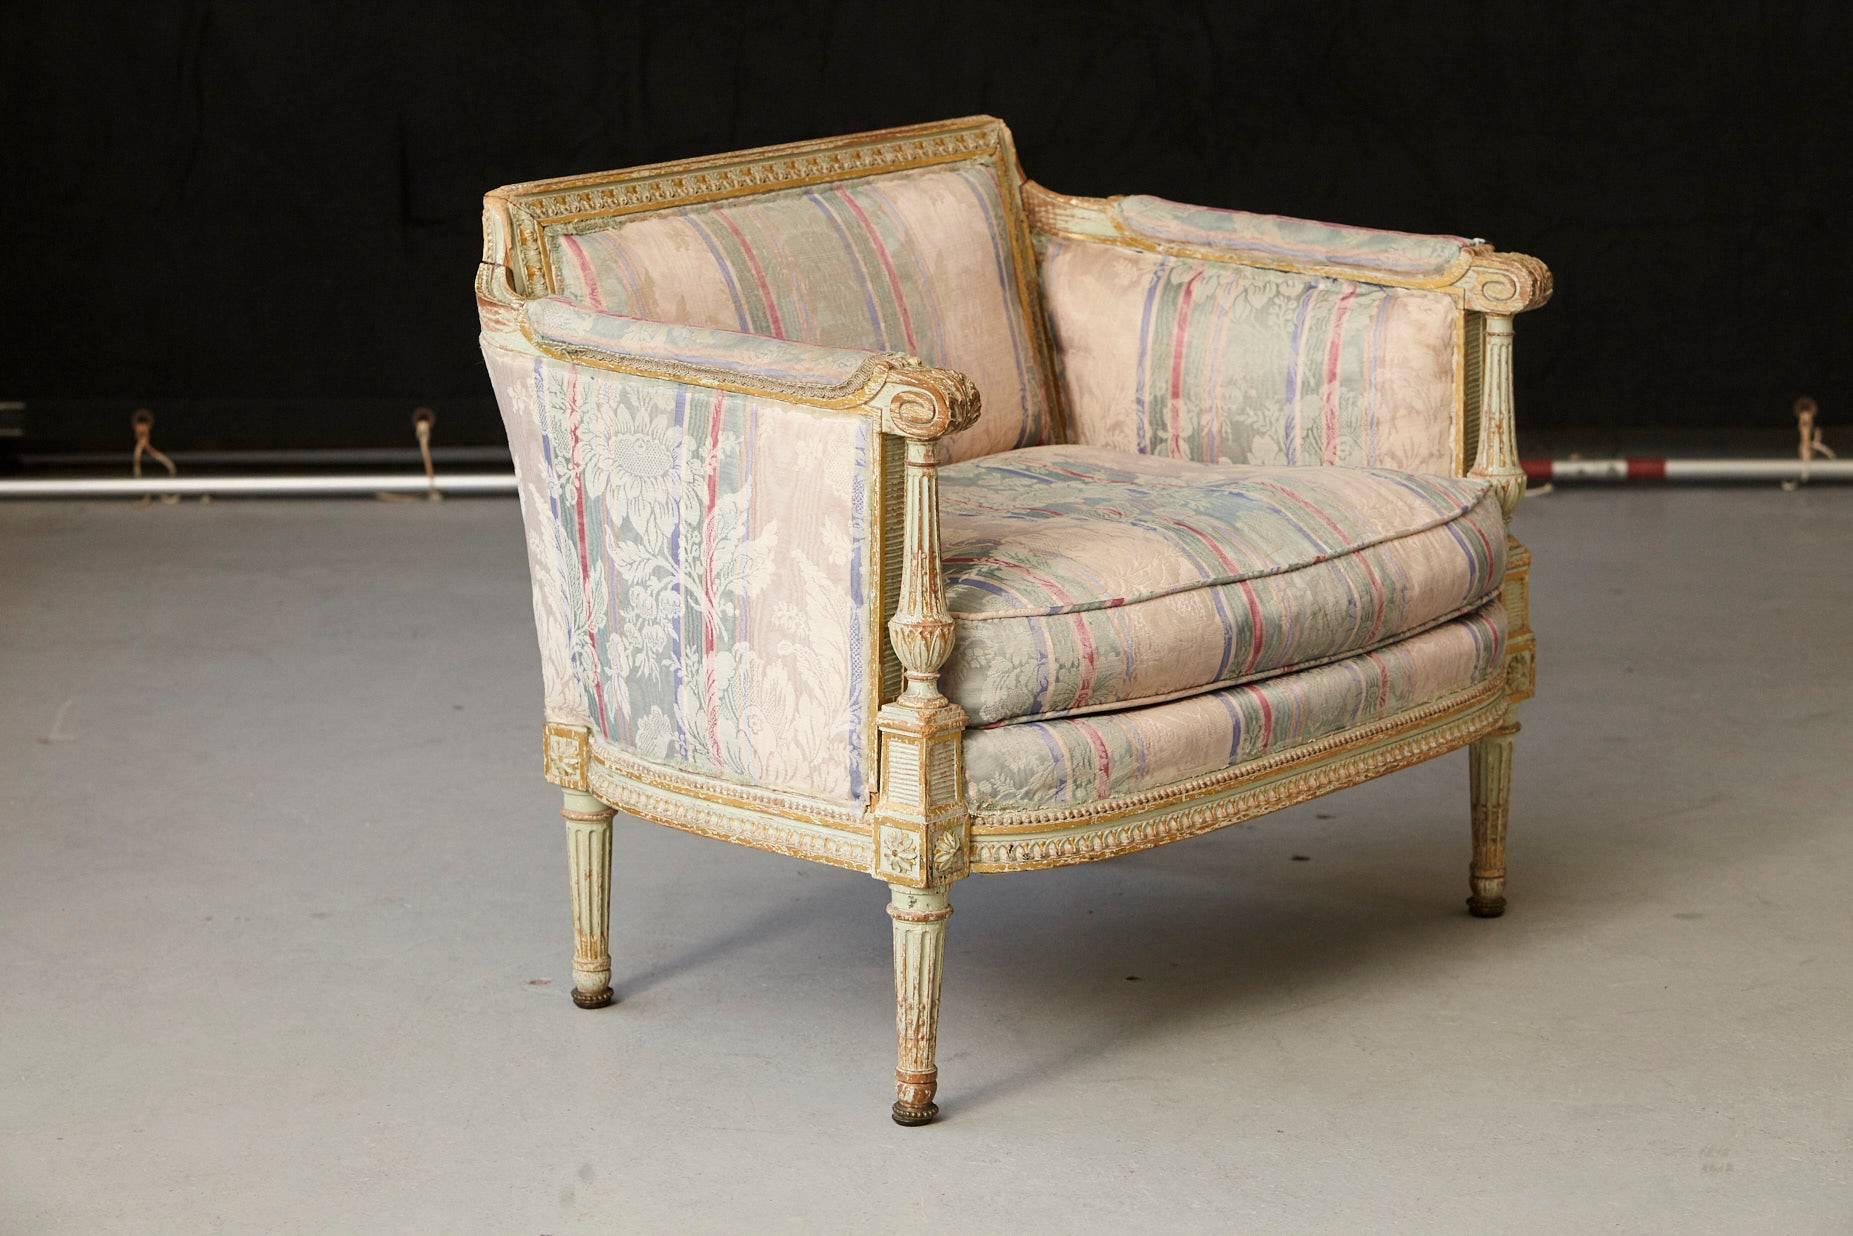 Gilt 19th Century French Paint and Gild Decorated Bèrgere in the Style of Louis XVI